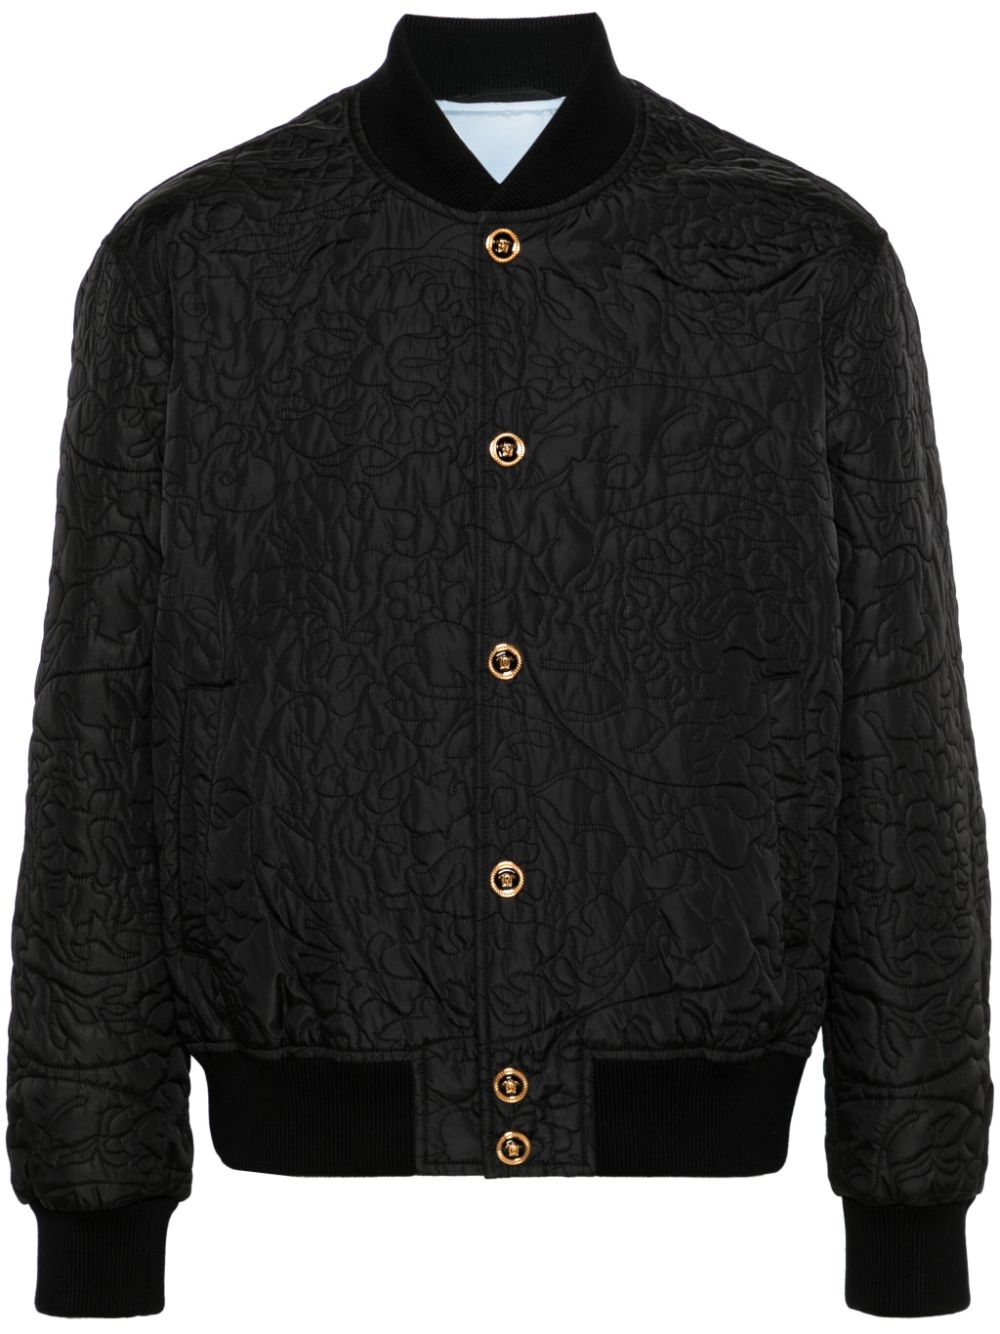 Barocco-quilted bomber jacket<BR/><BR/><BR/>